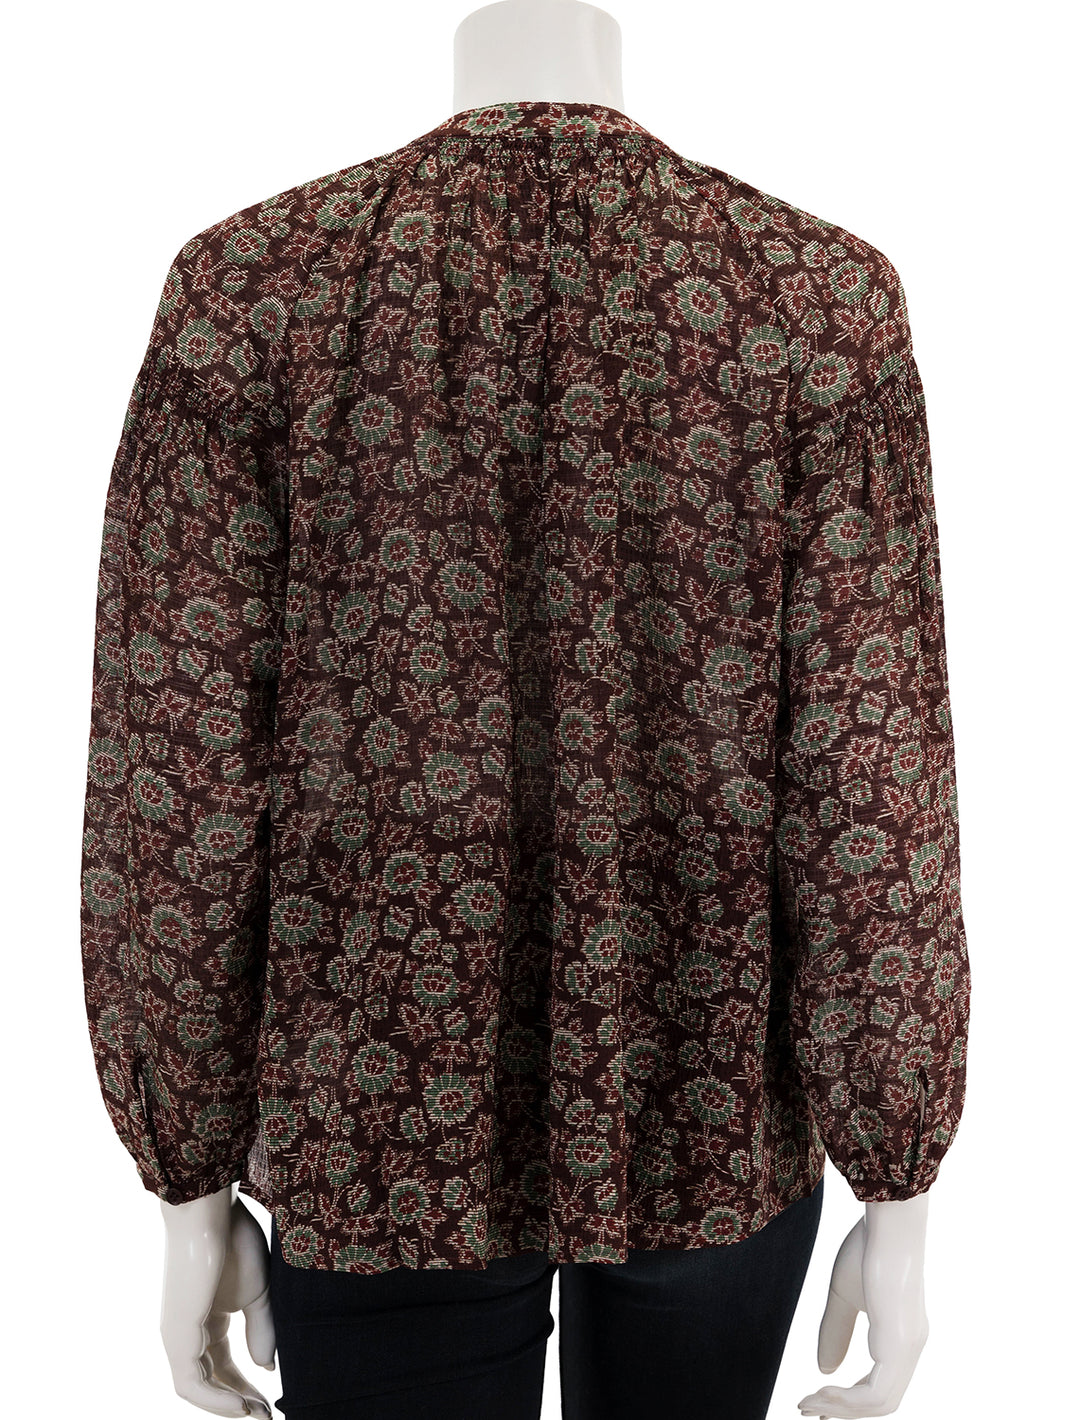 back view of nipoa blouse in marron